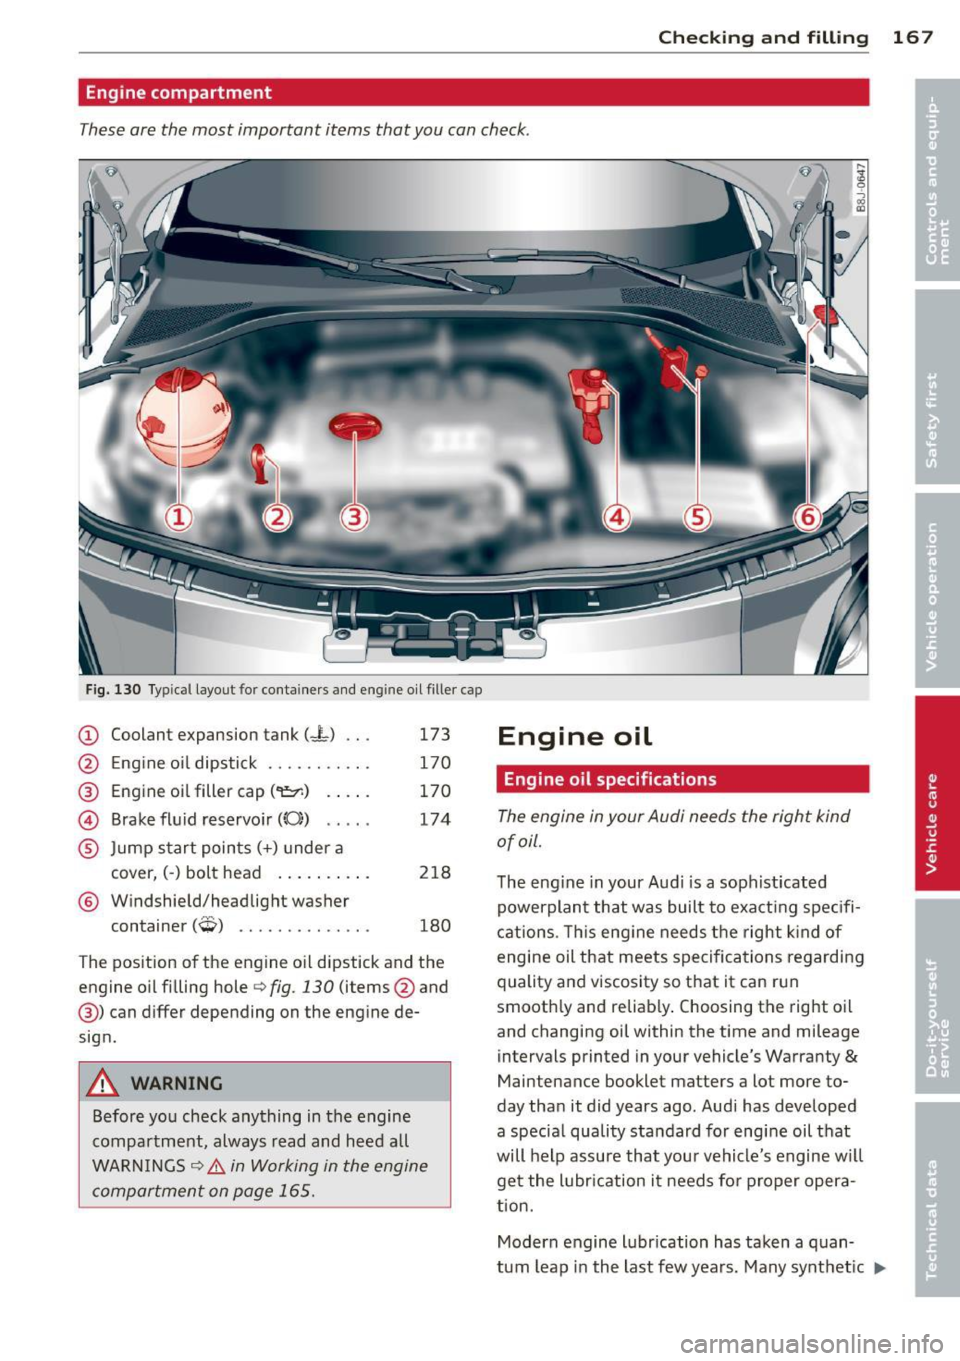 AUDI TT ROADSTER 2014  Owners Manual Checking and  fillin g 167 
Eng ine compartment 
These are  the most  important  items  that  you  can check  . 
• 
Fig. 130 Typ ical  layout  for containers  and  eng ine  oil filler  cap 
(D Coola